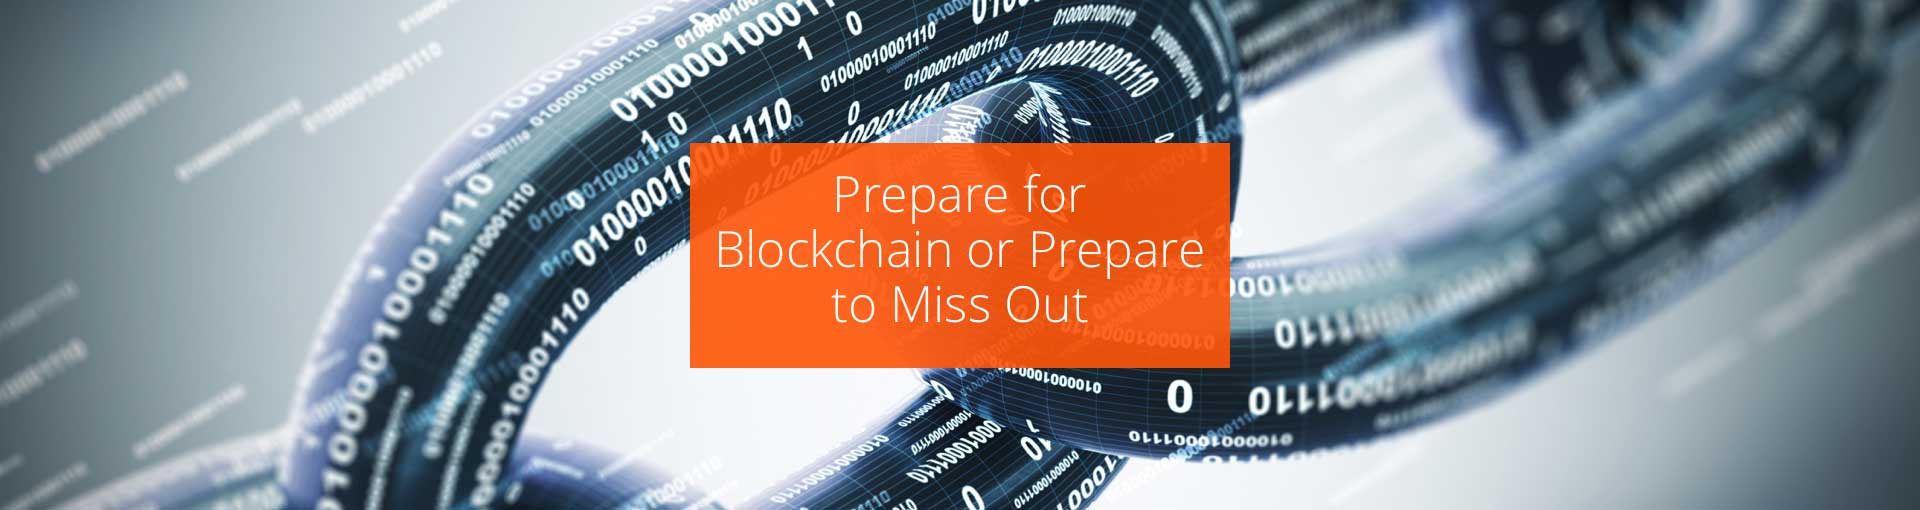 Prepare for Blockchain or Prepare to Miss Out Featured Image